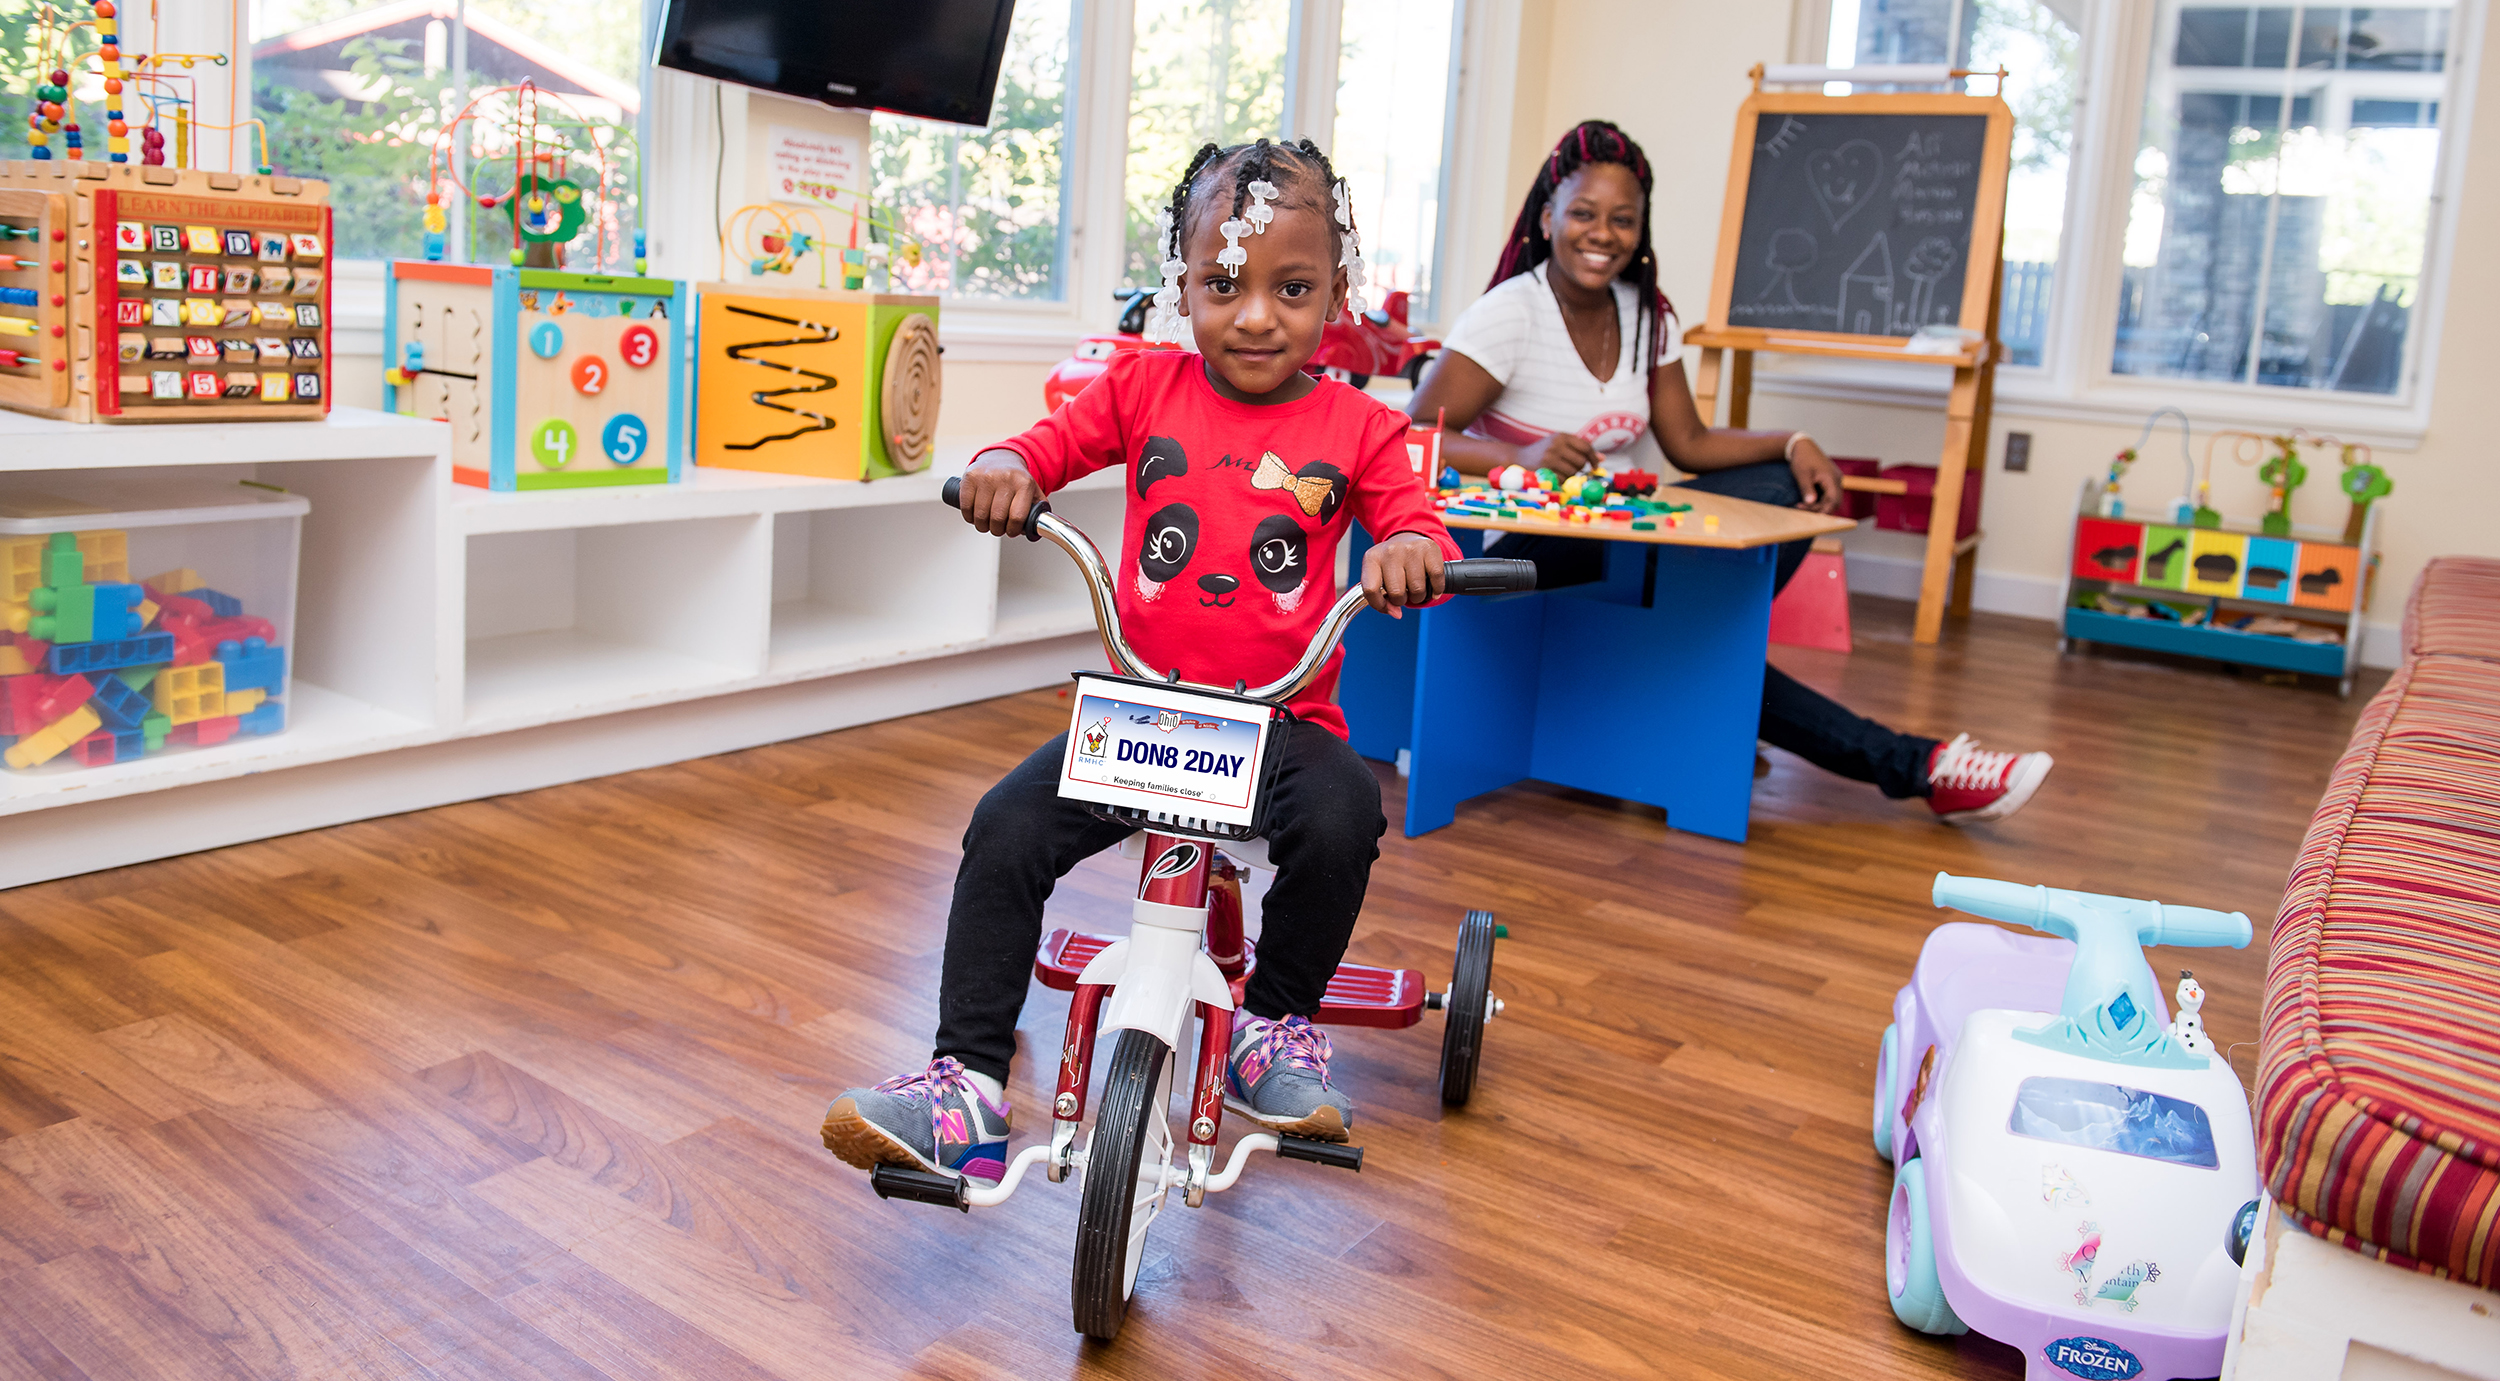 A child riding a tricycle in a playroom full of toys, smiling while her mom smiles and watches her in the background.